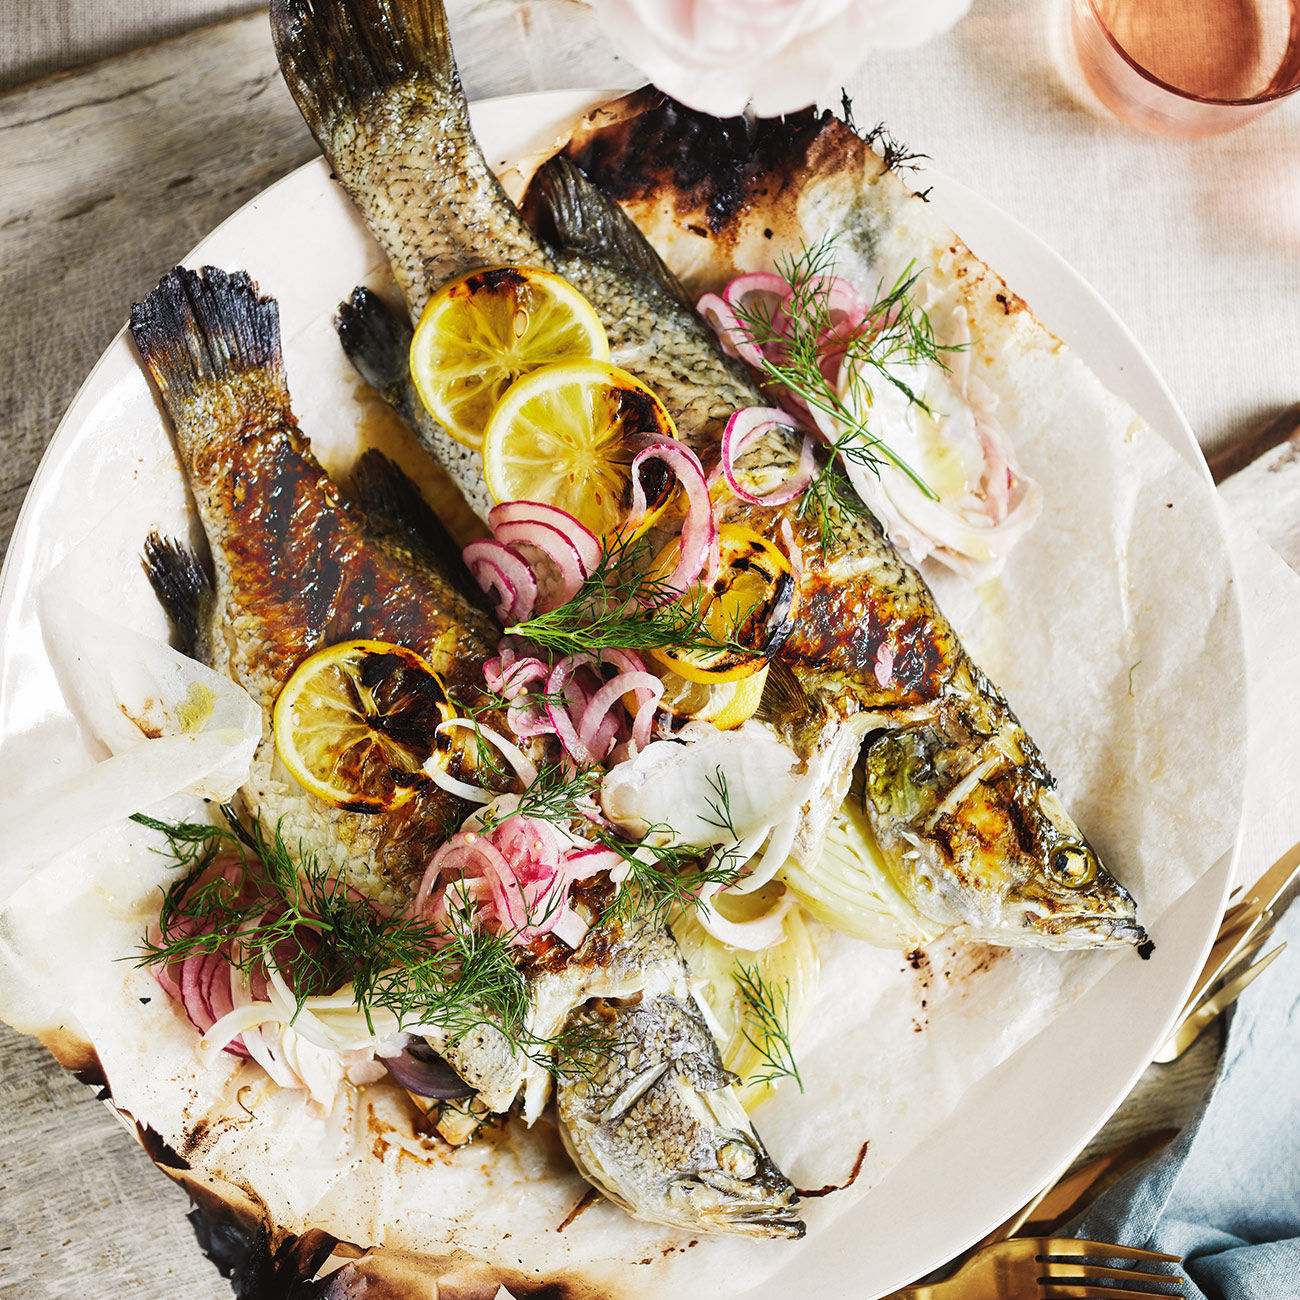 Barbecued Whole Barramundi With Fennel Dill Lemon Stuffing Recipe